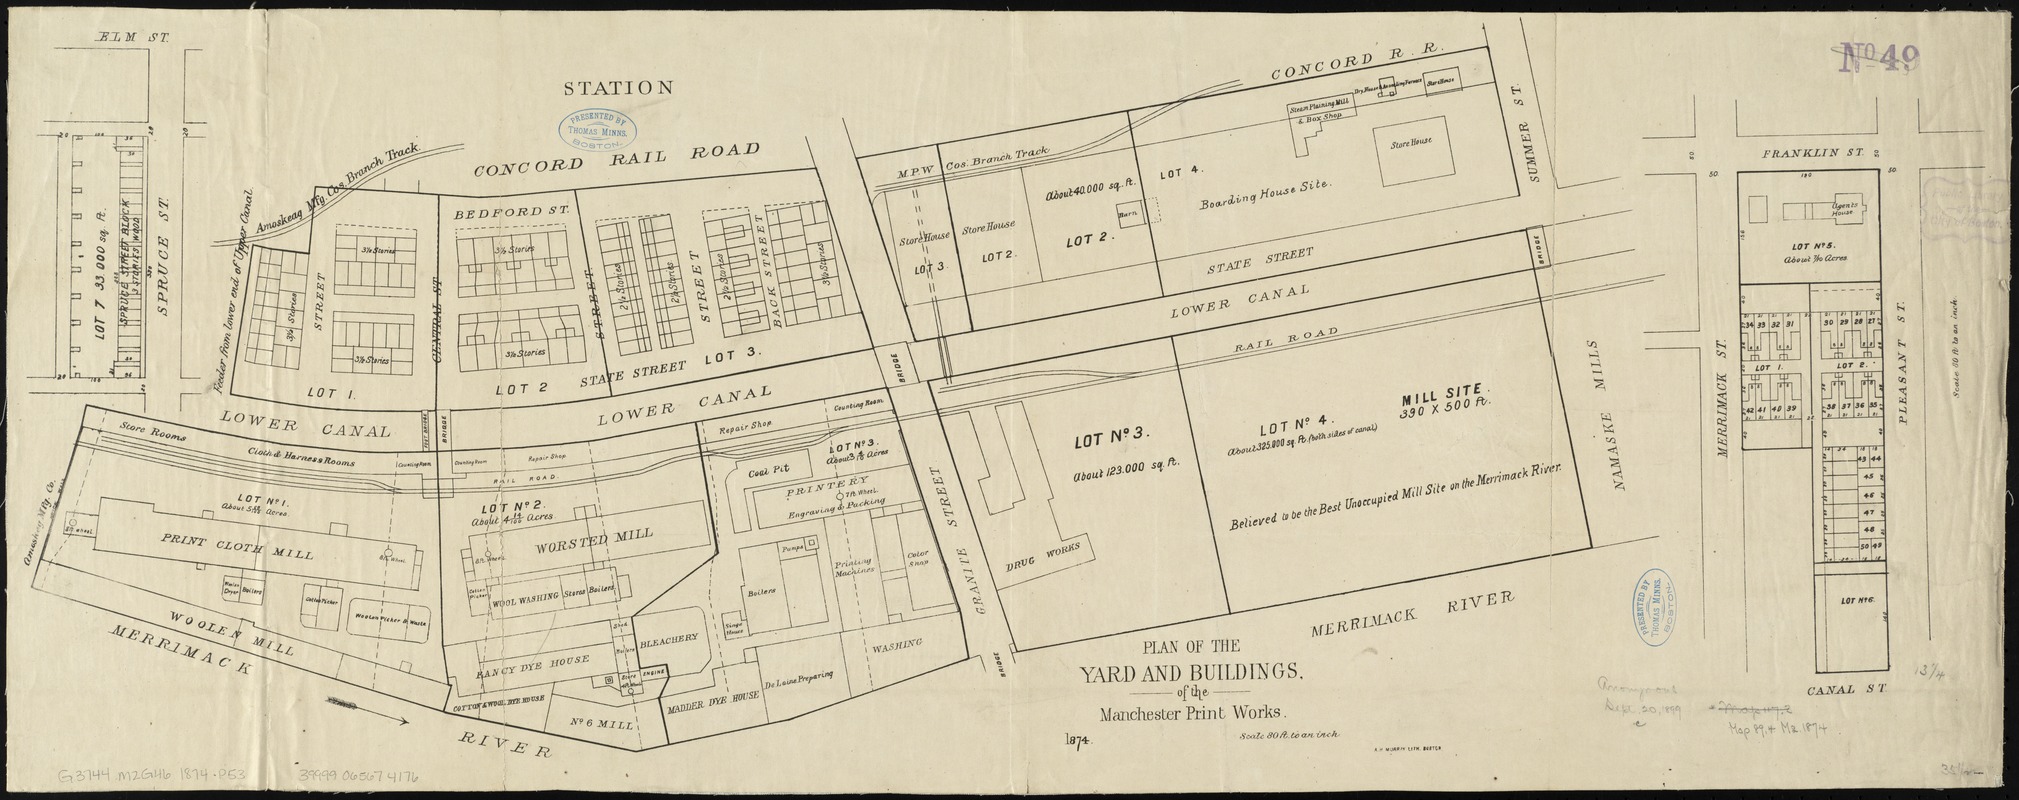 Plan of the yard and buildings of the Manchester Print Works